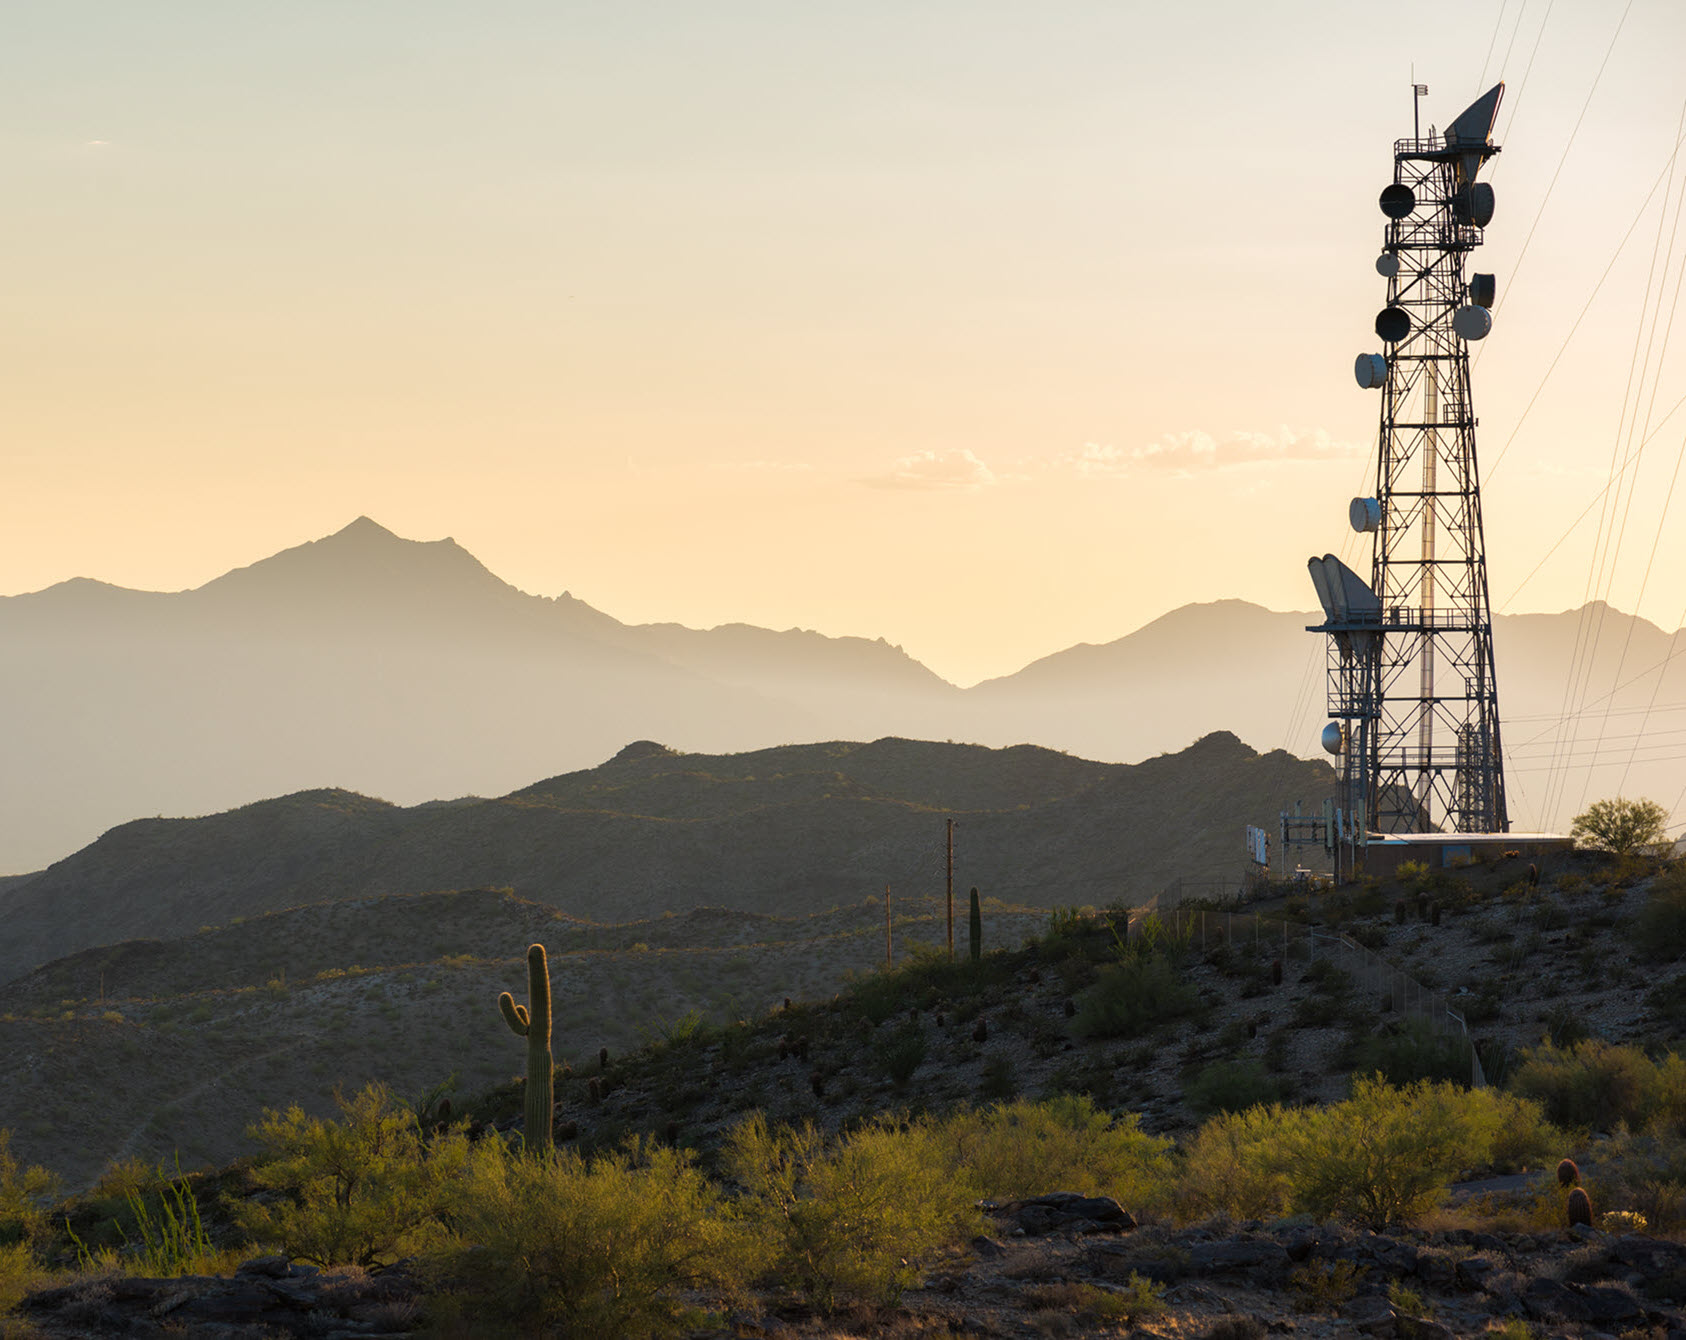 Landscape image of an industrial cell tower in the middle of a desert mountain range.